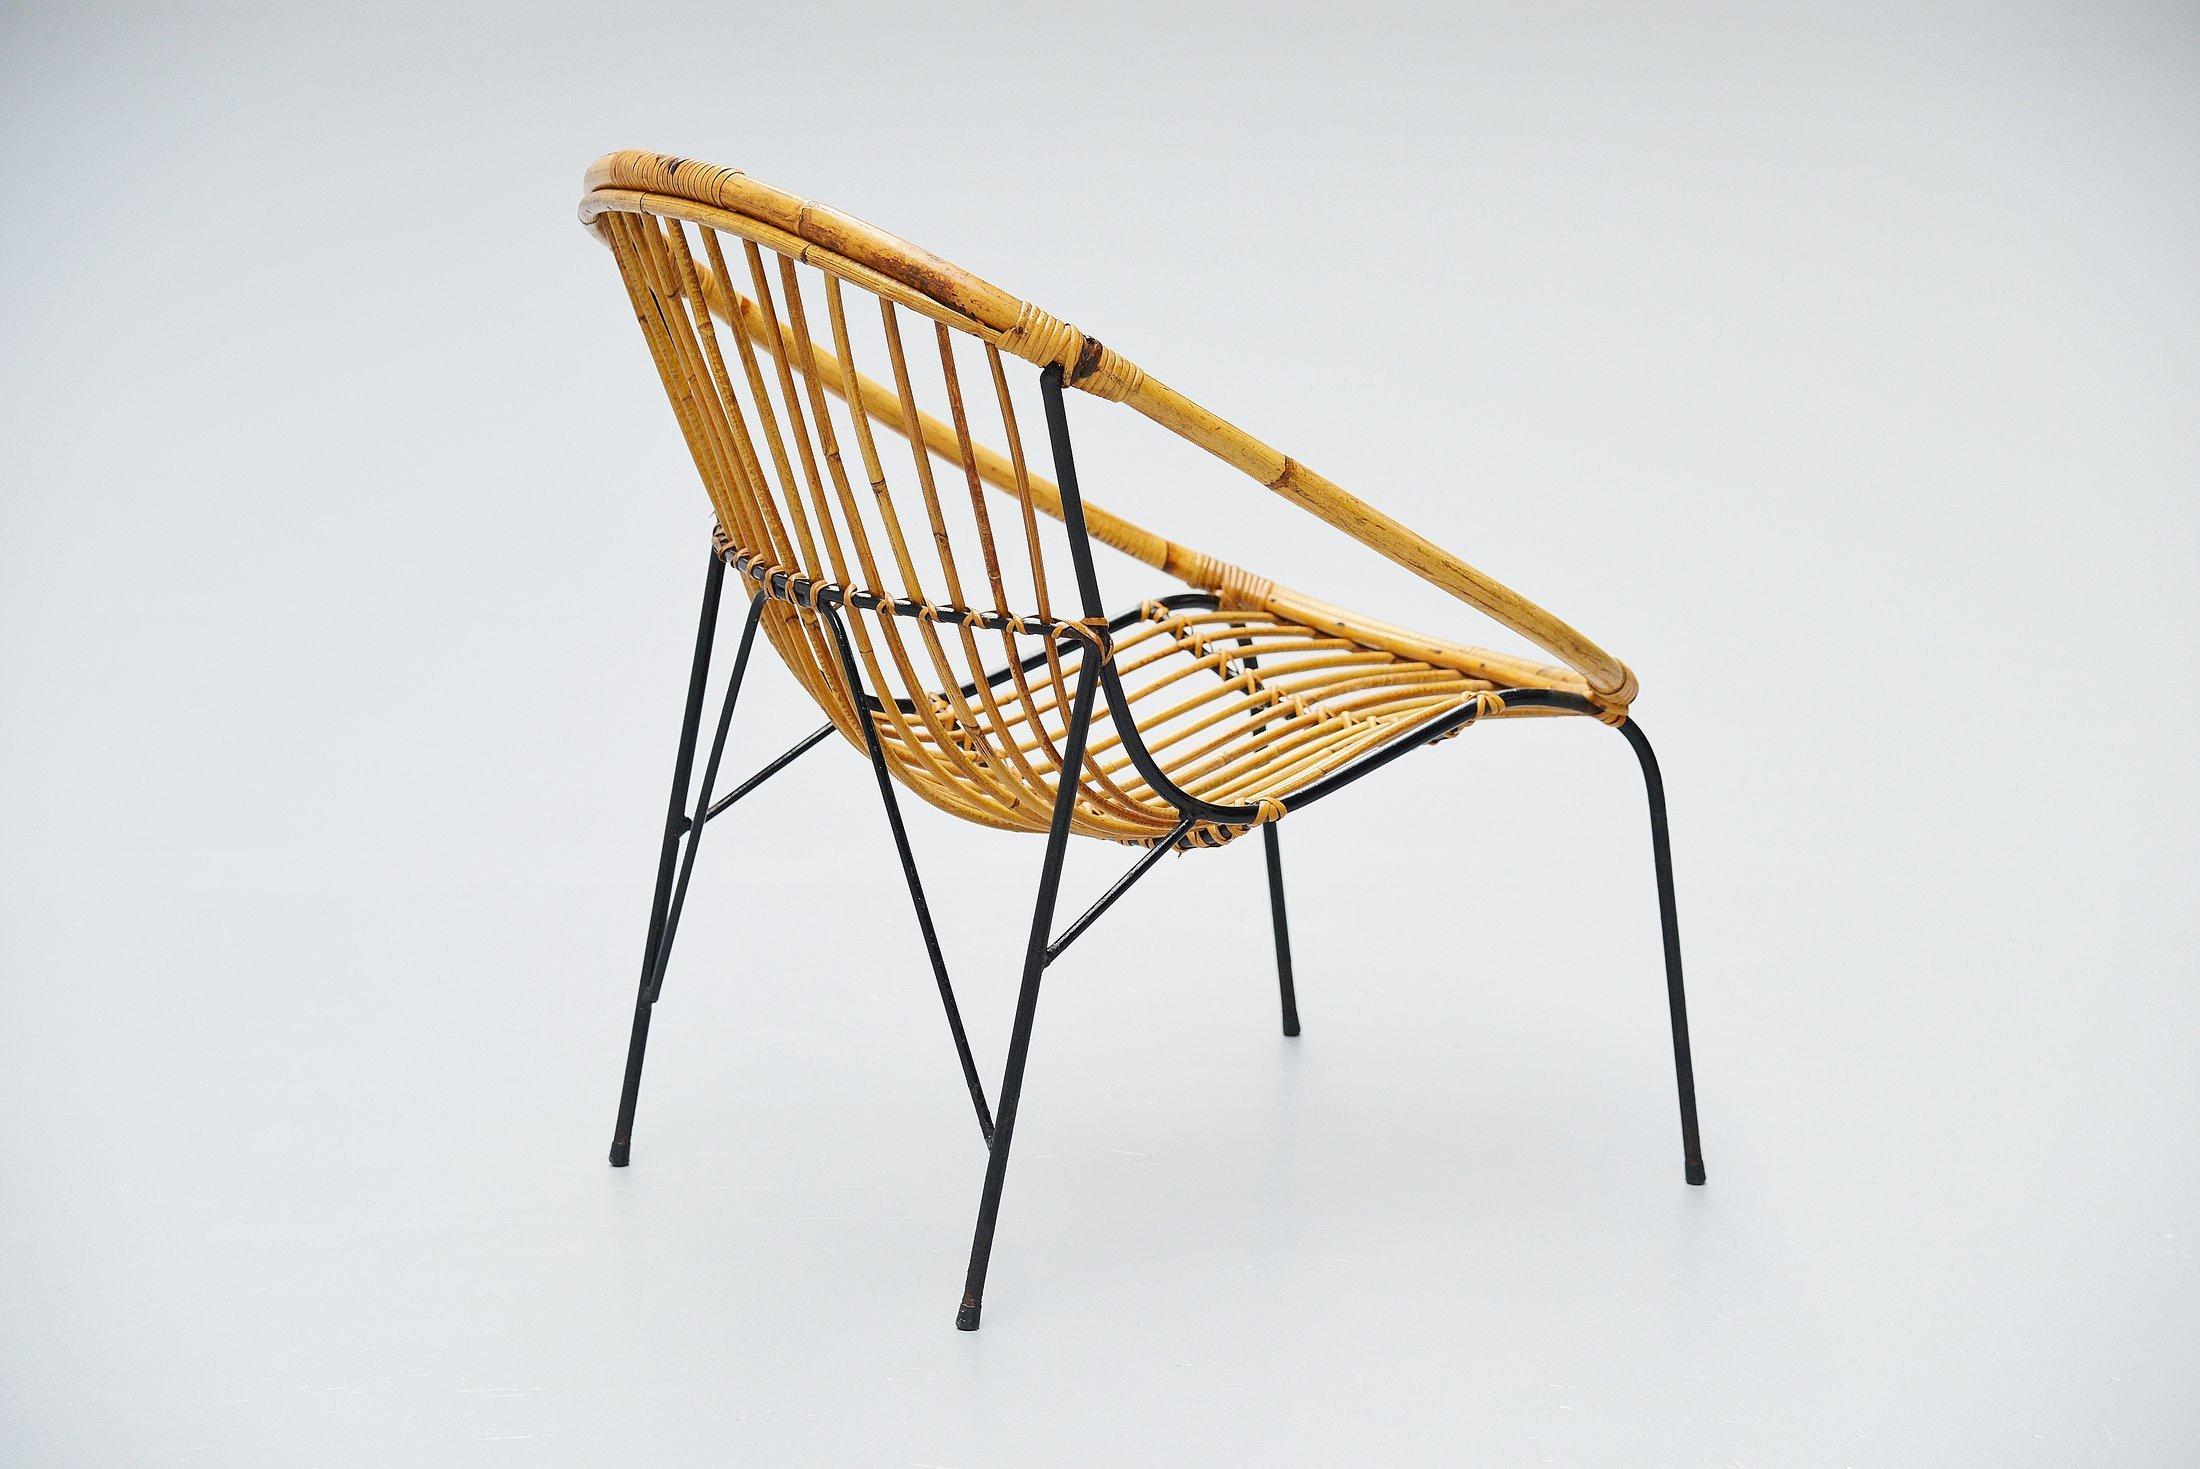 Very nice sculptural rattan small lounge chair made by unknown designer or manufacturer in France, 1950. The chair has a solid steel frame, black painted and rattan handwoven seat. Very nicely shaped chair, can be finished with a sheep skin for